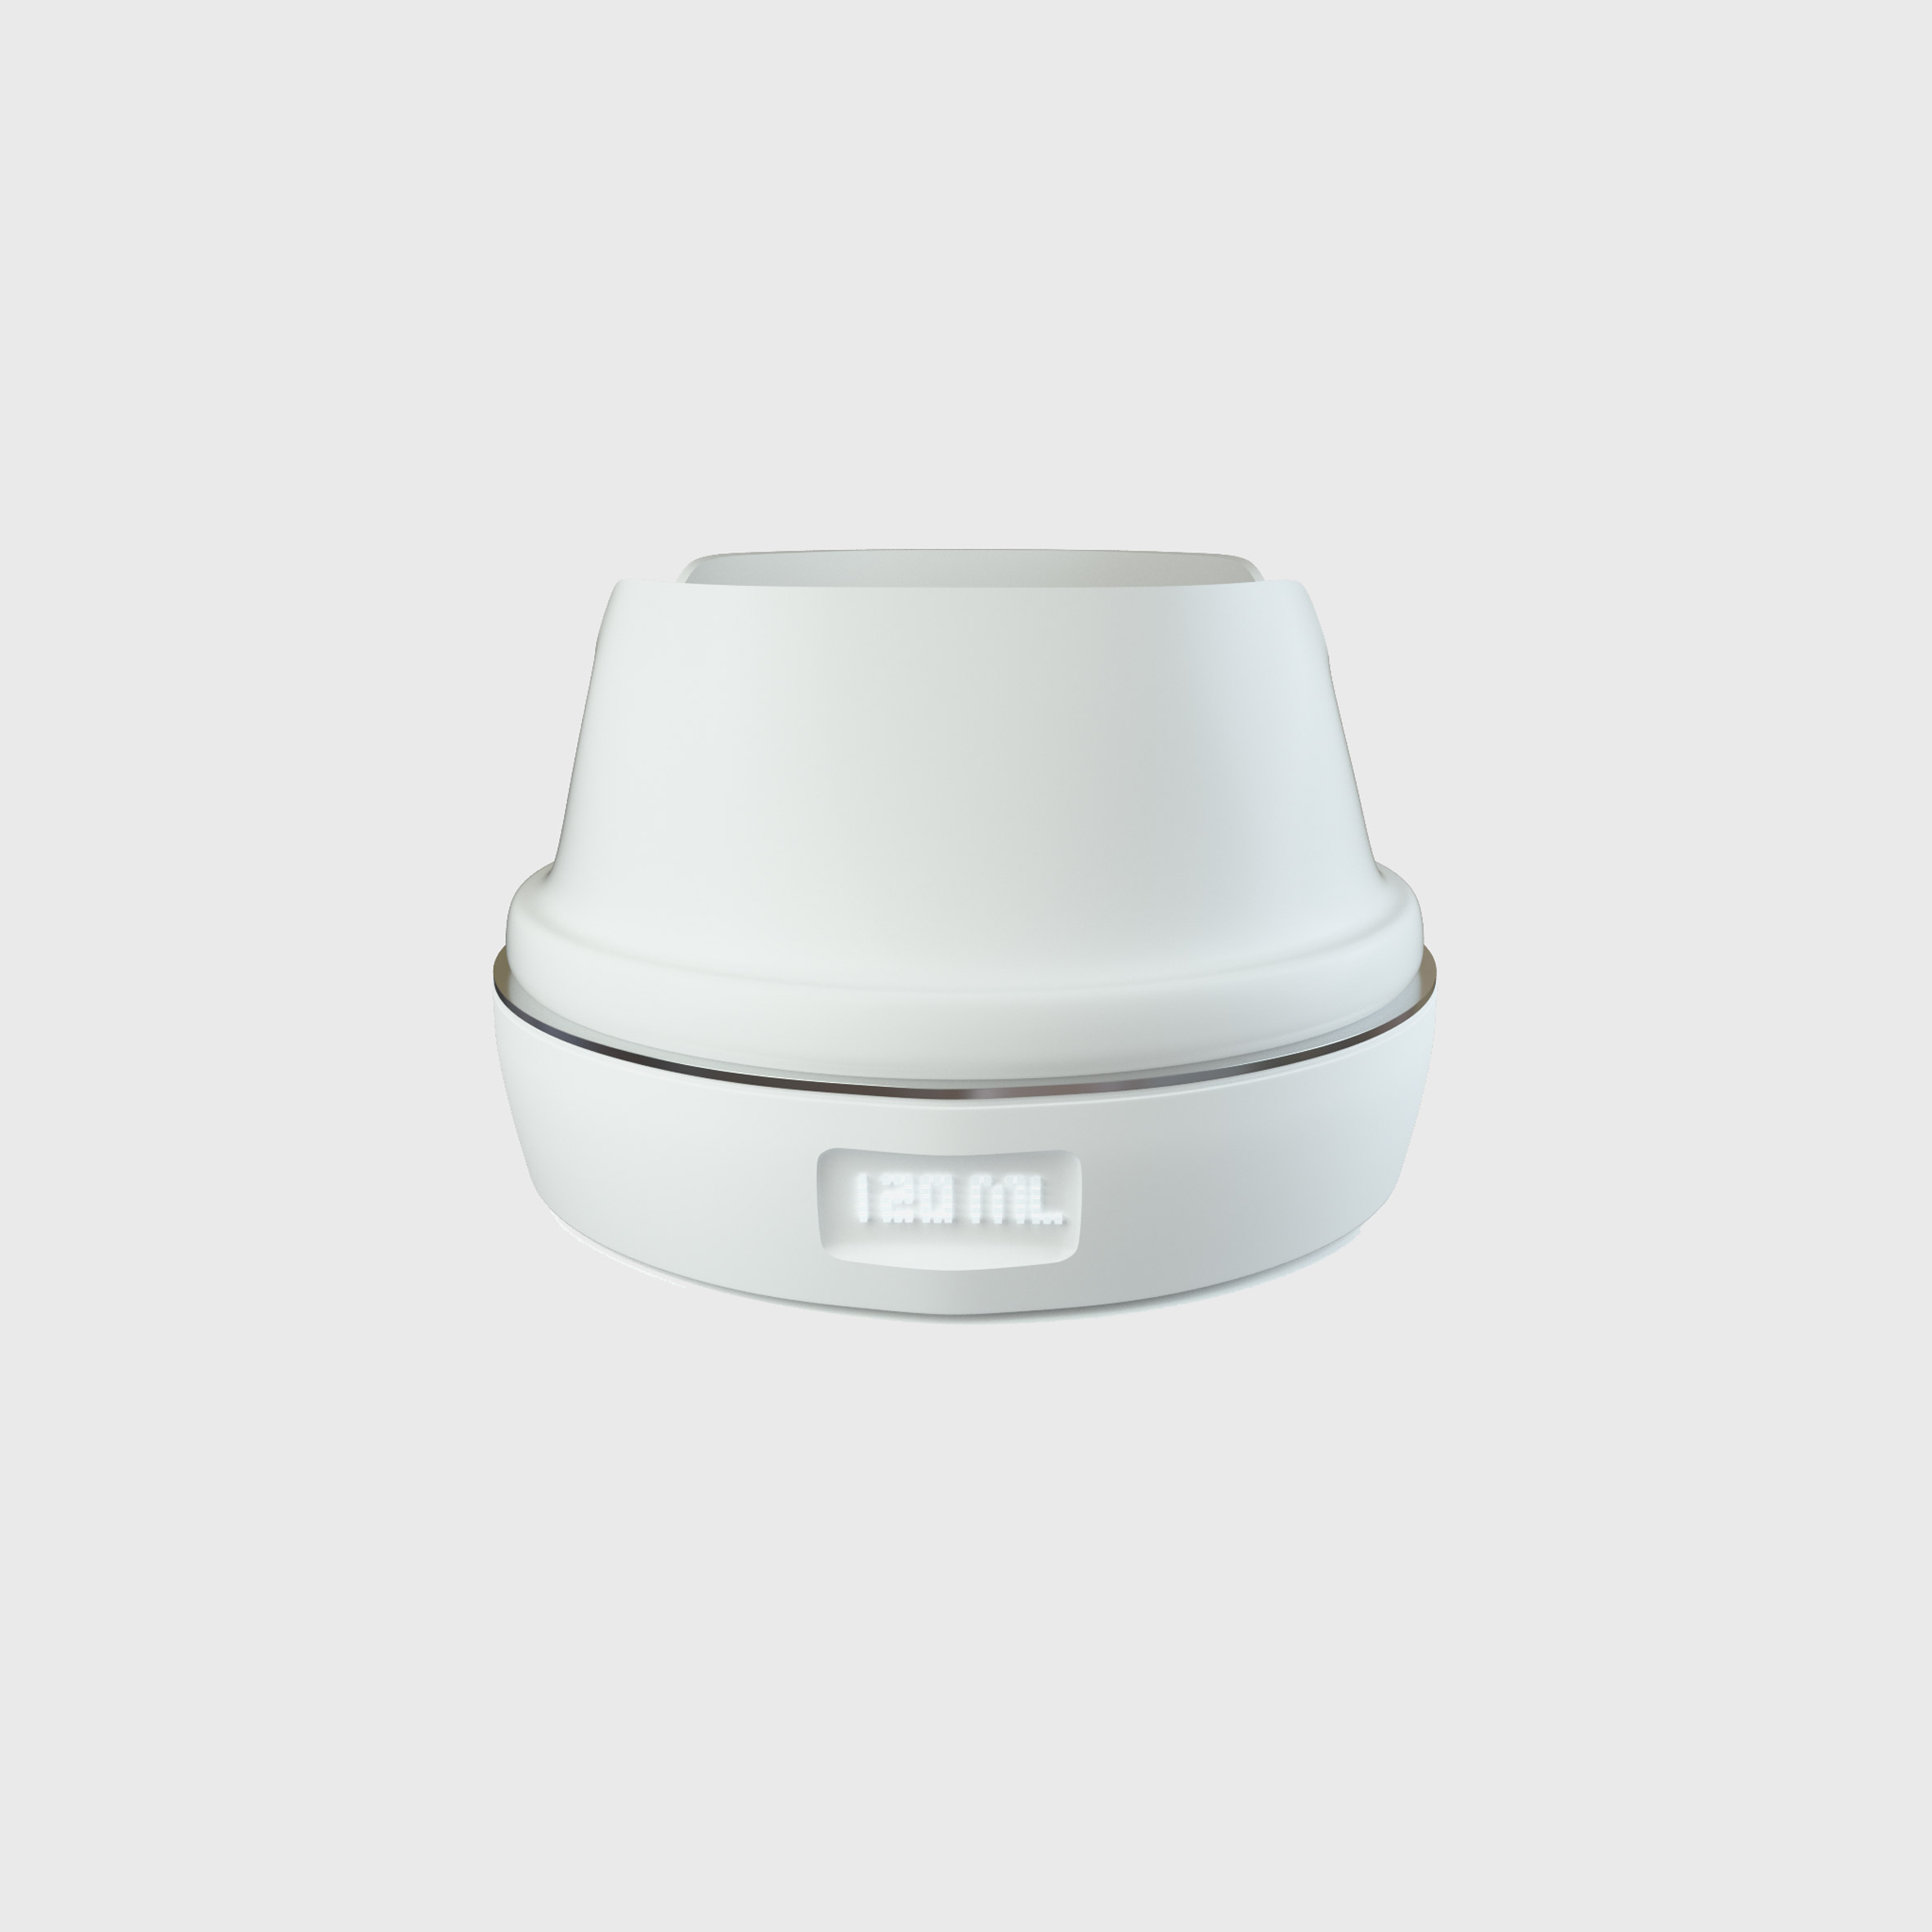 White Milky Assistant device on a grey background